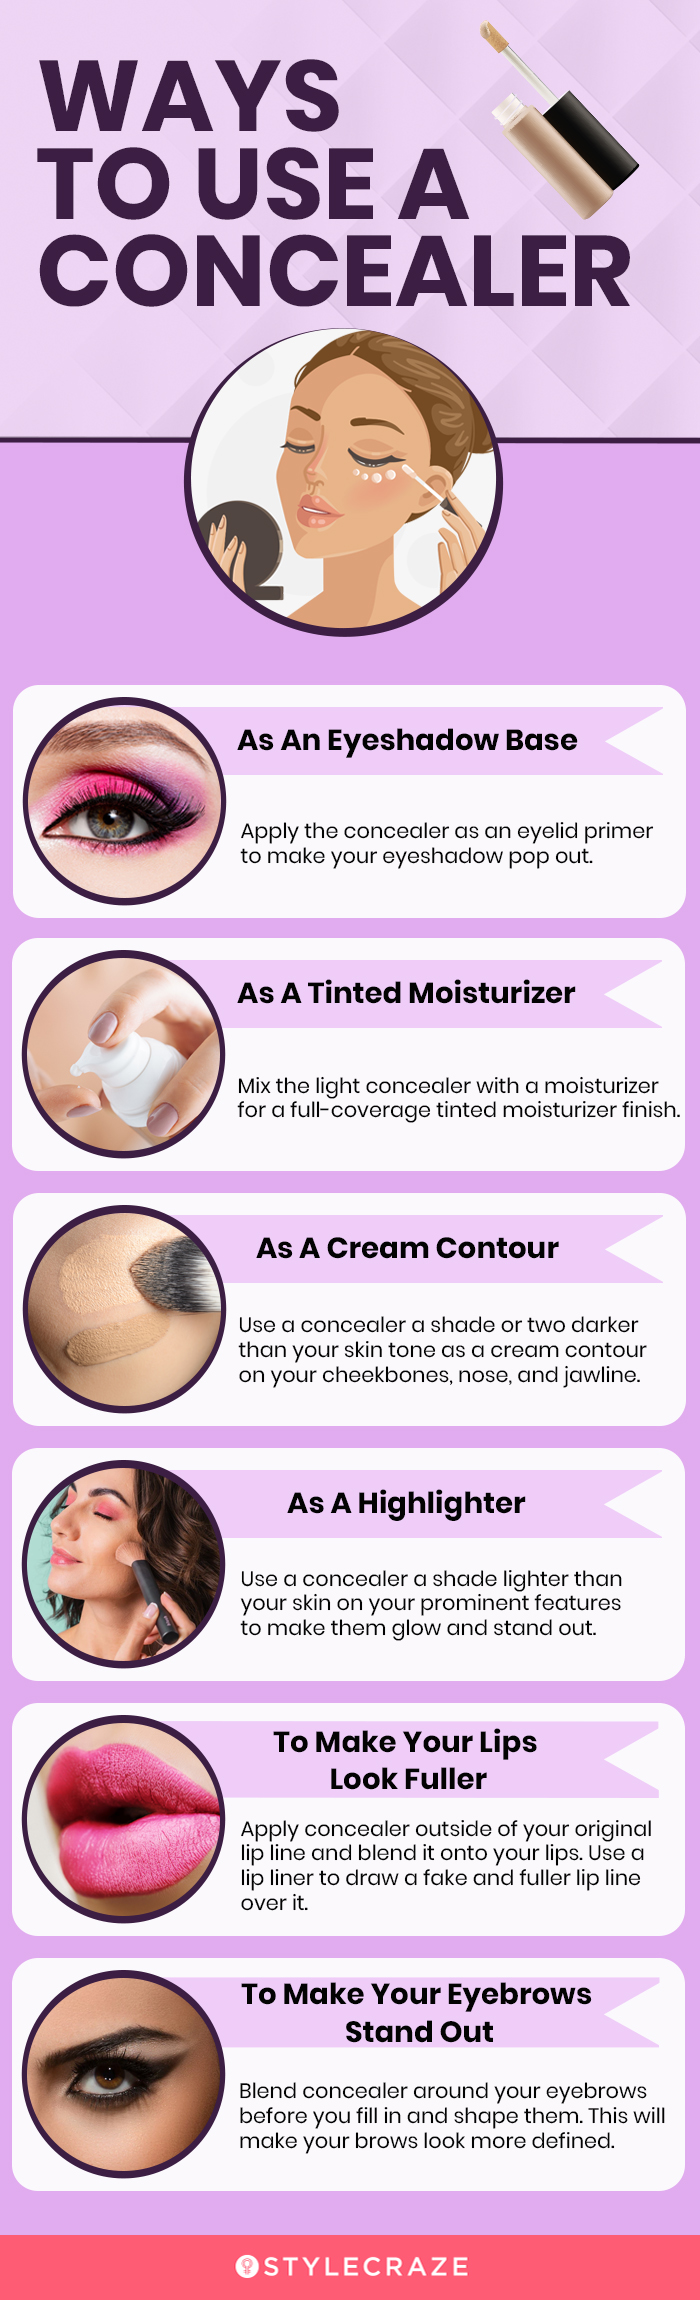 ways to use a concealer [infographic]